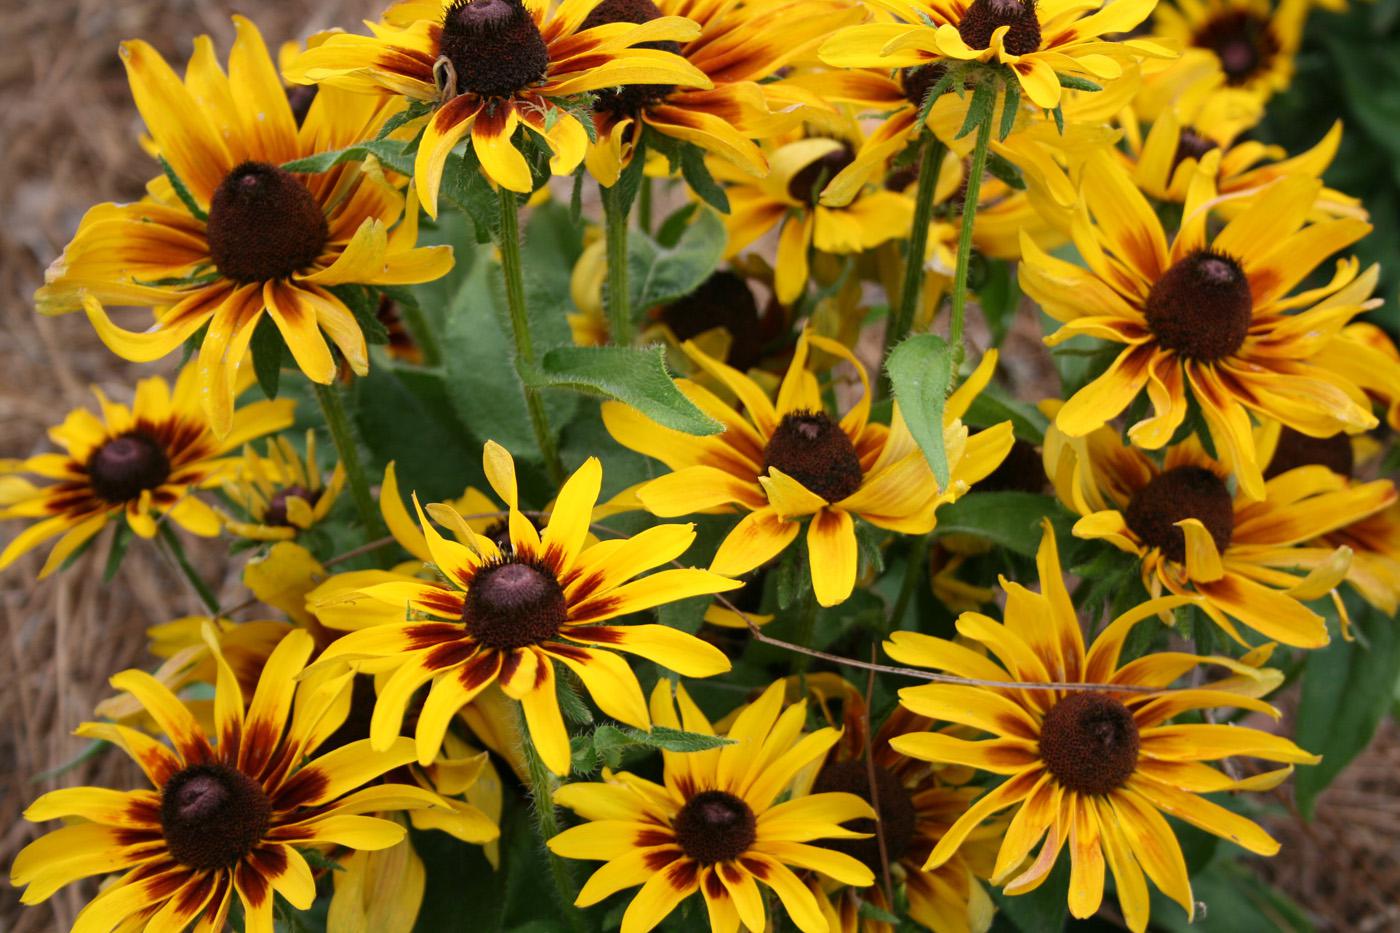 The golden yellow petals and dark red halo of Denver Daisy rudbeckia make a bright statement in the summer landscape. (Photo by Gary Bachman)